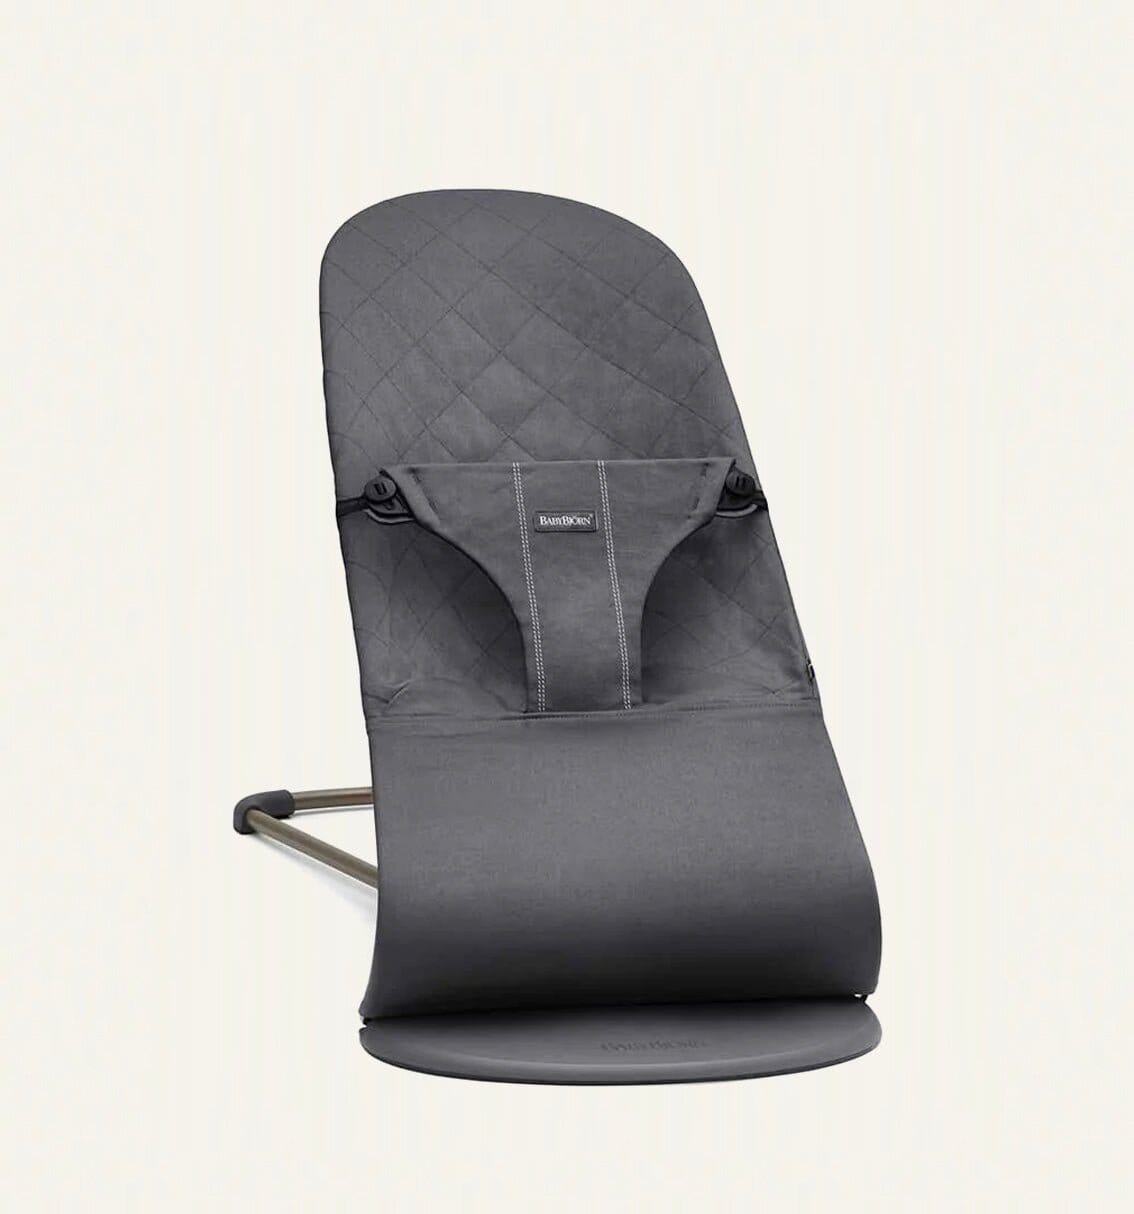 Babybjorn bouncer in Anthracite for just £21 per month from Baboodle.